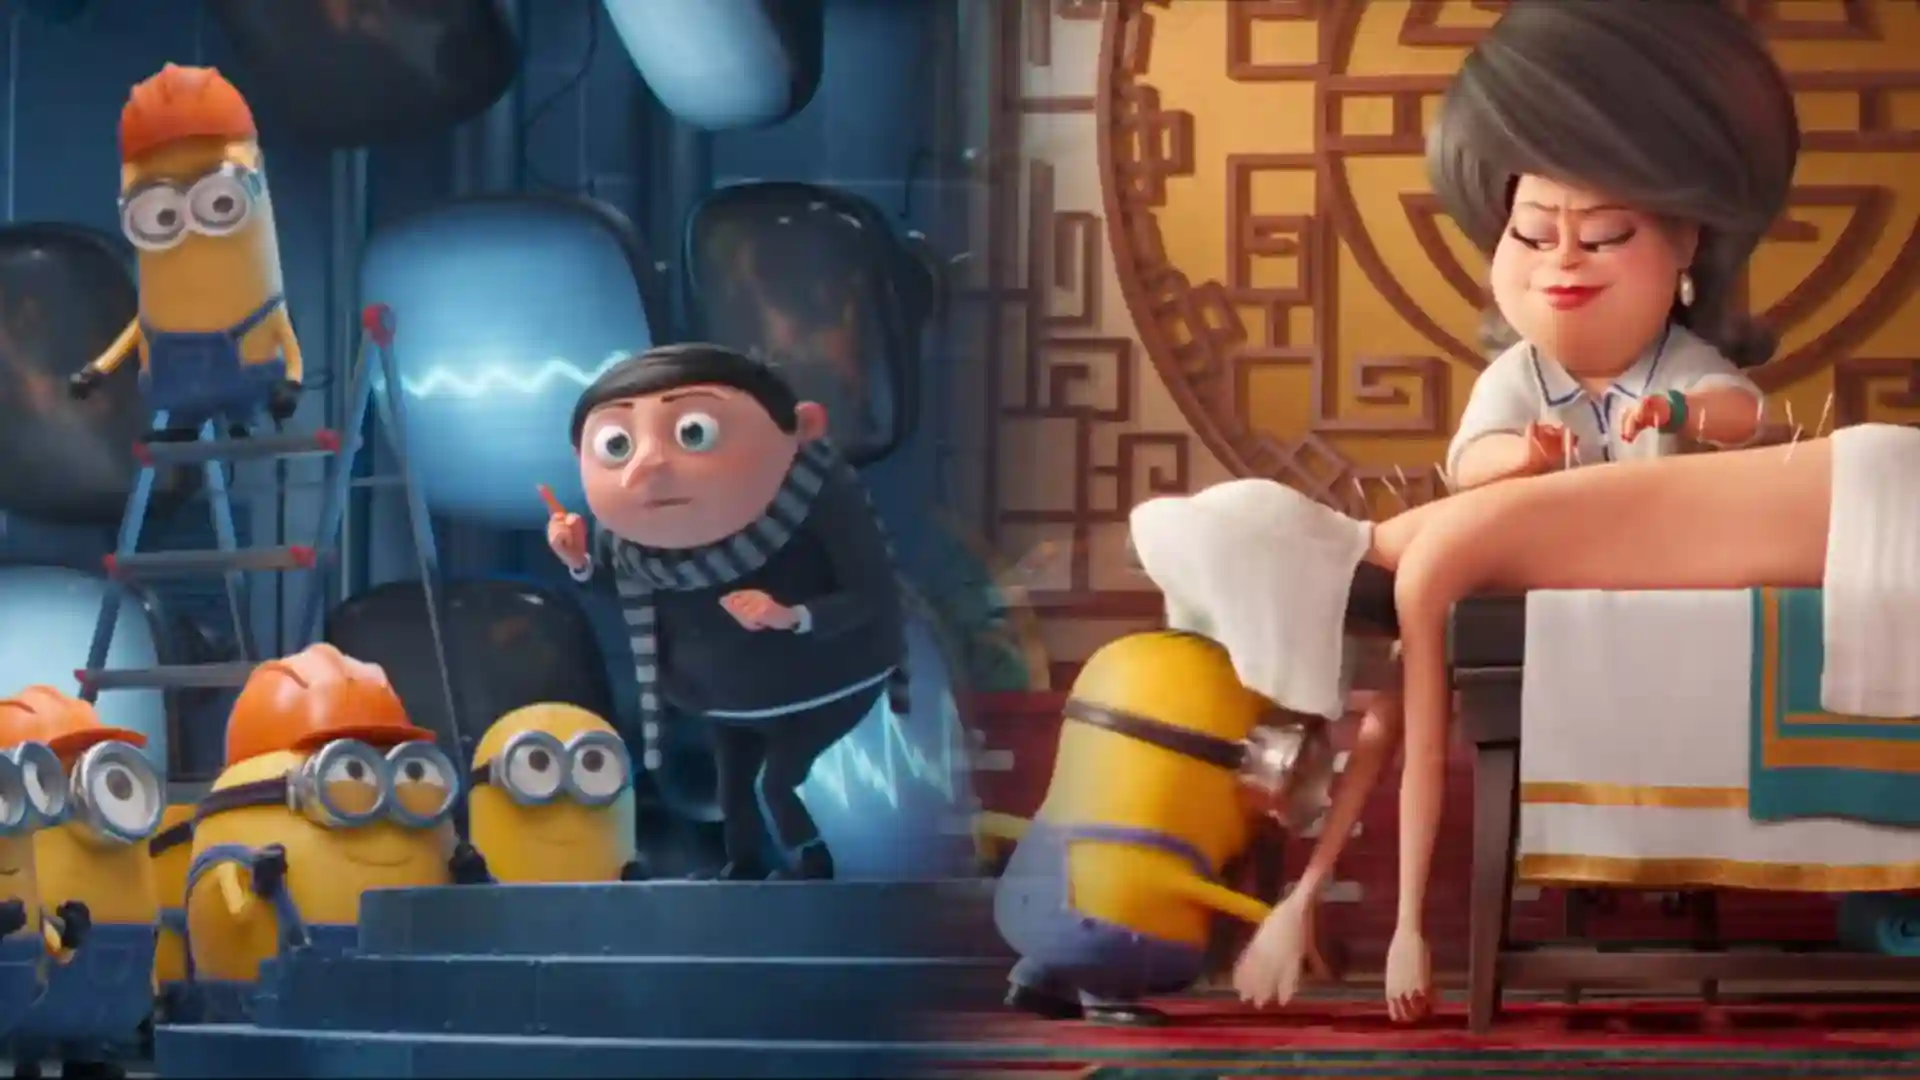 Streaming Minions: The Rise of Gru